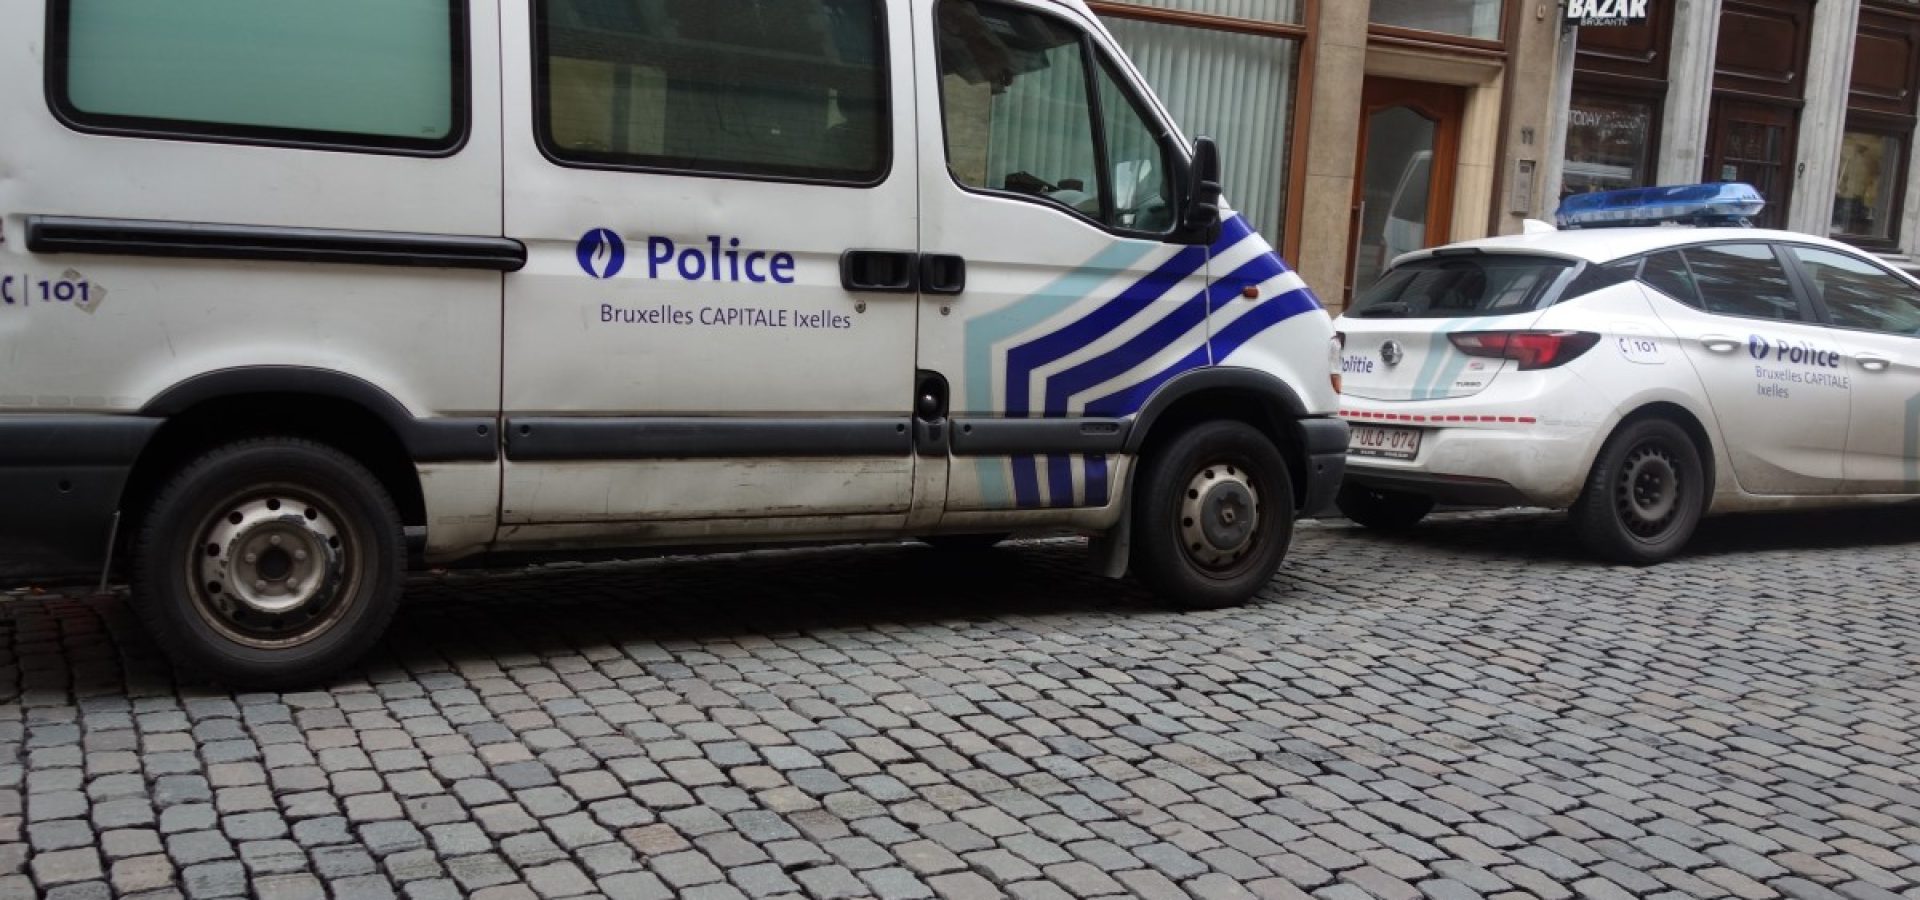 Belgian police and crypto crimes